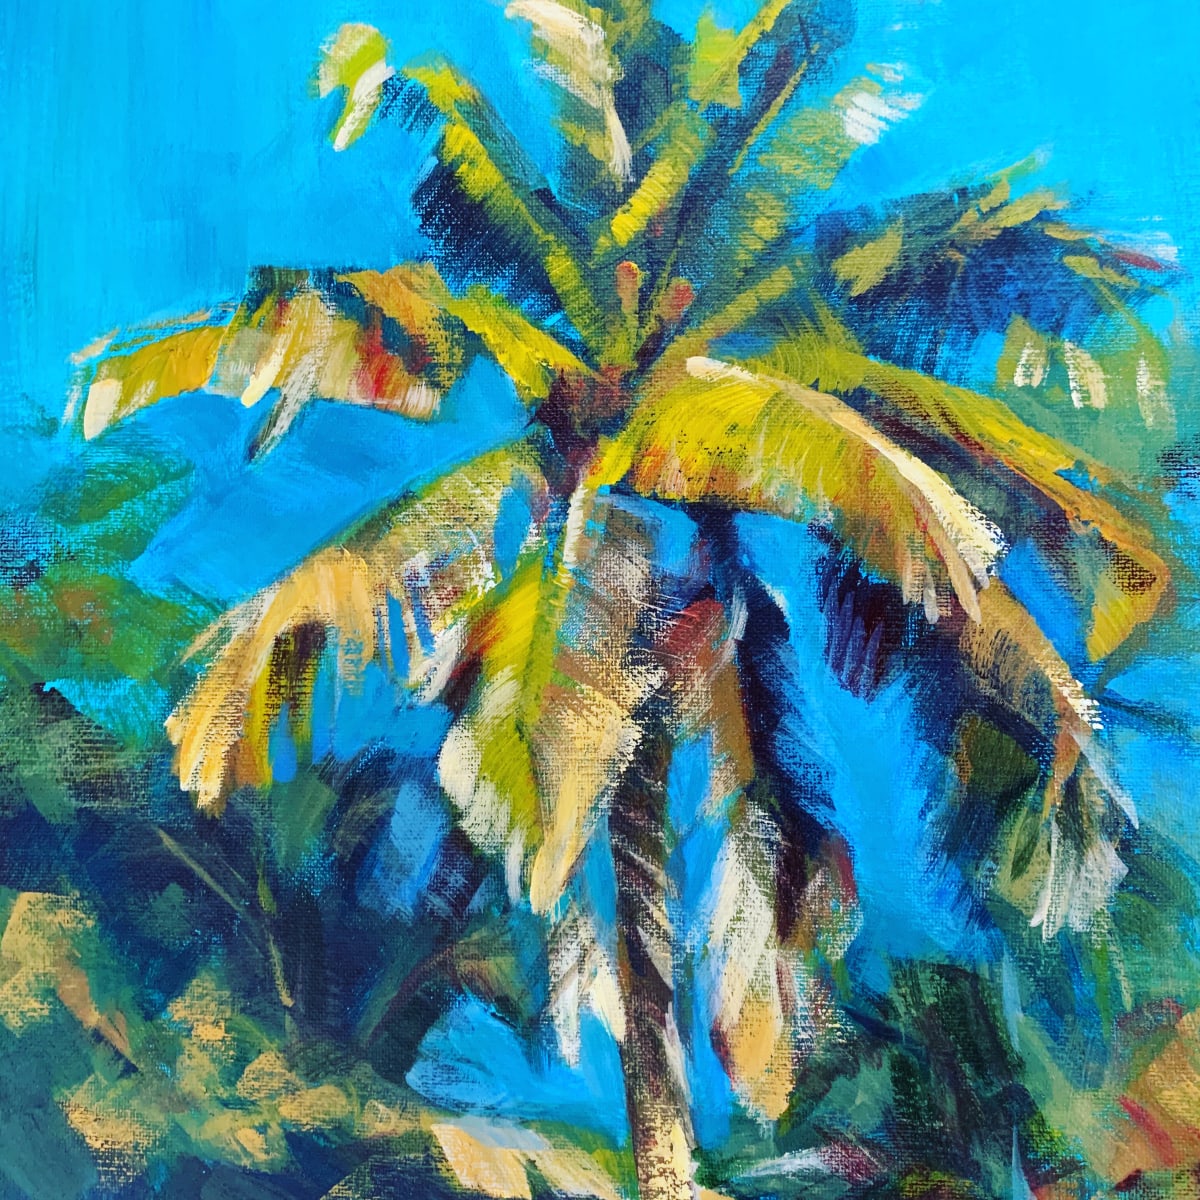 Sunlit Palm by Susan Clare  Image: This square version of the image is available in print and gift items here: http://www.susanclarefineart.com